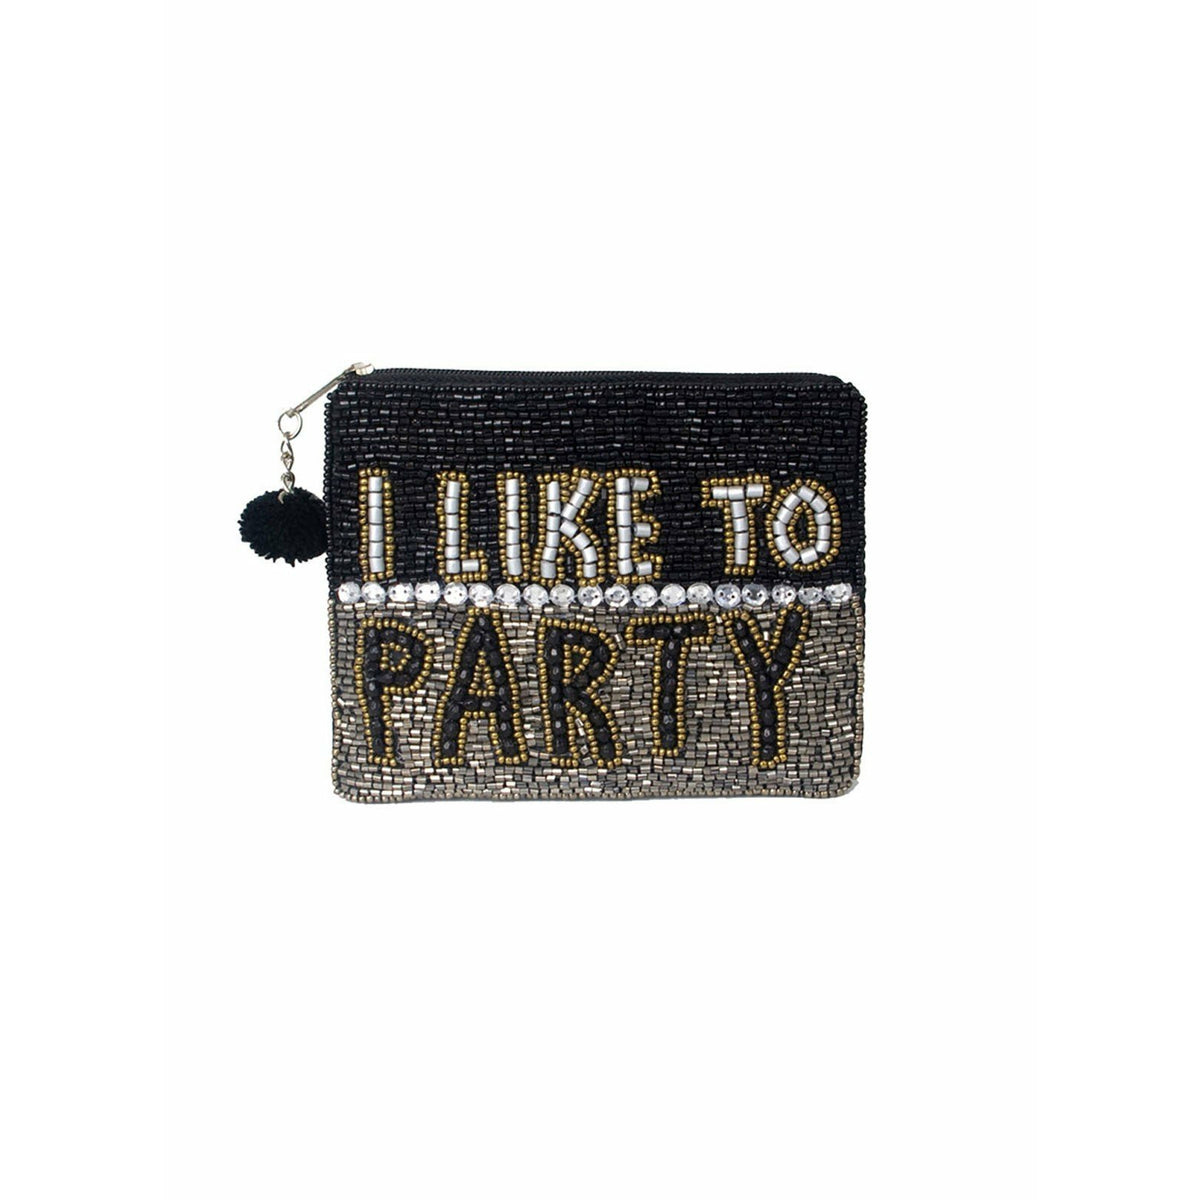 Tamboril Wallets and Money Clips I Like to Party Small Beaded Purse tween and teen